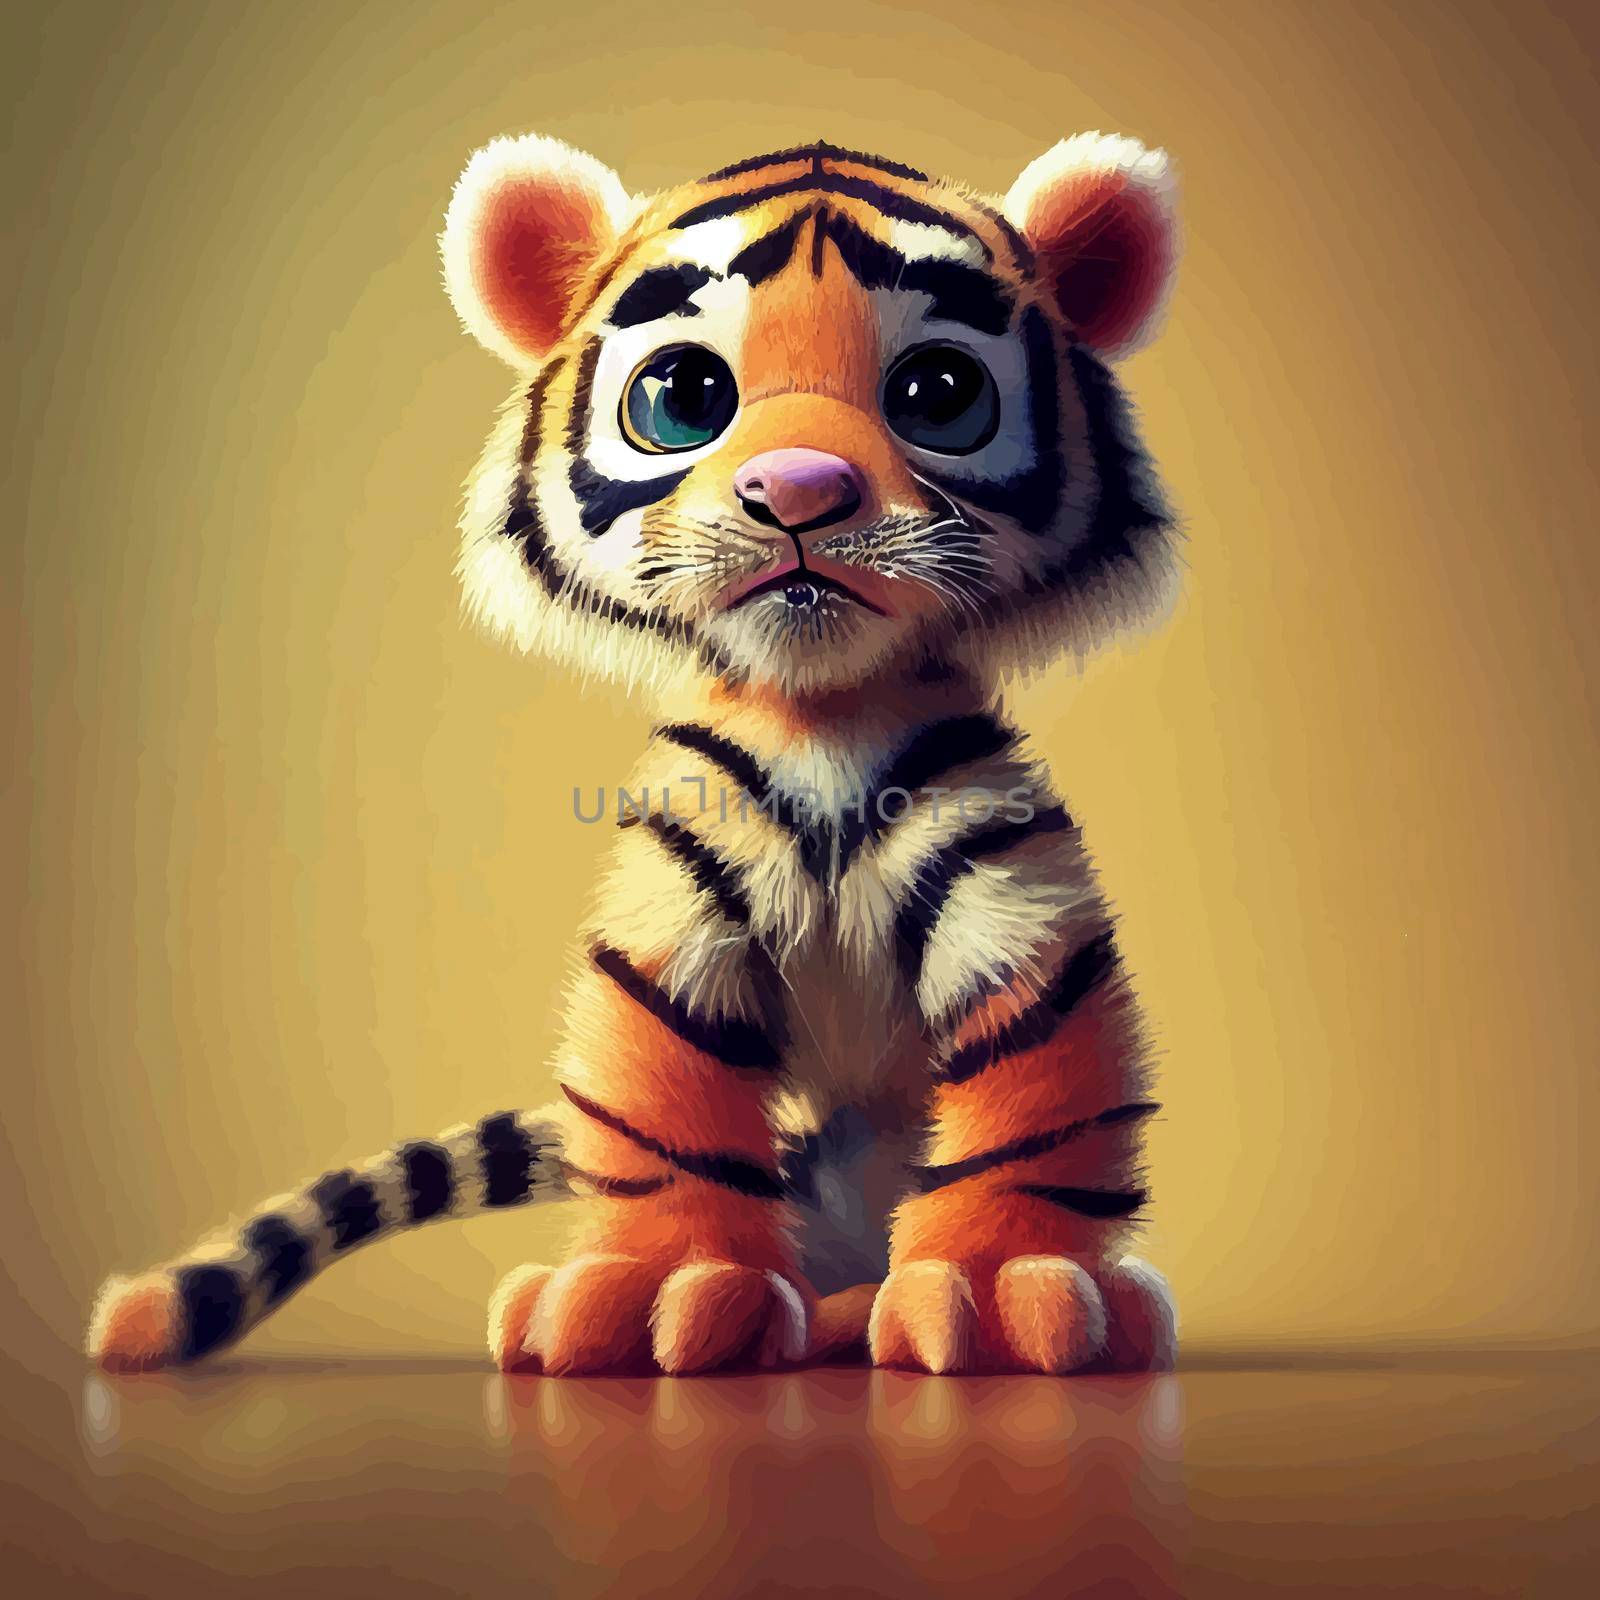 animated illustration of a cute tiger, animated baby tiger portrait.